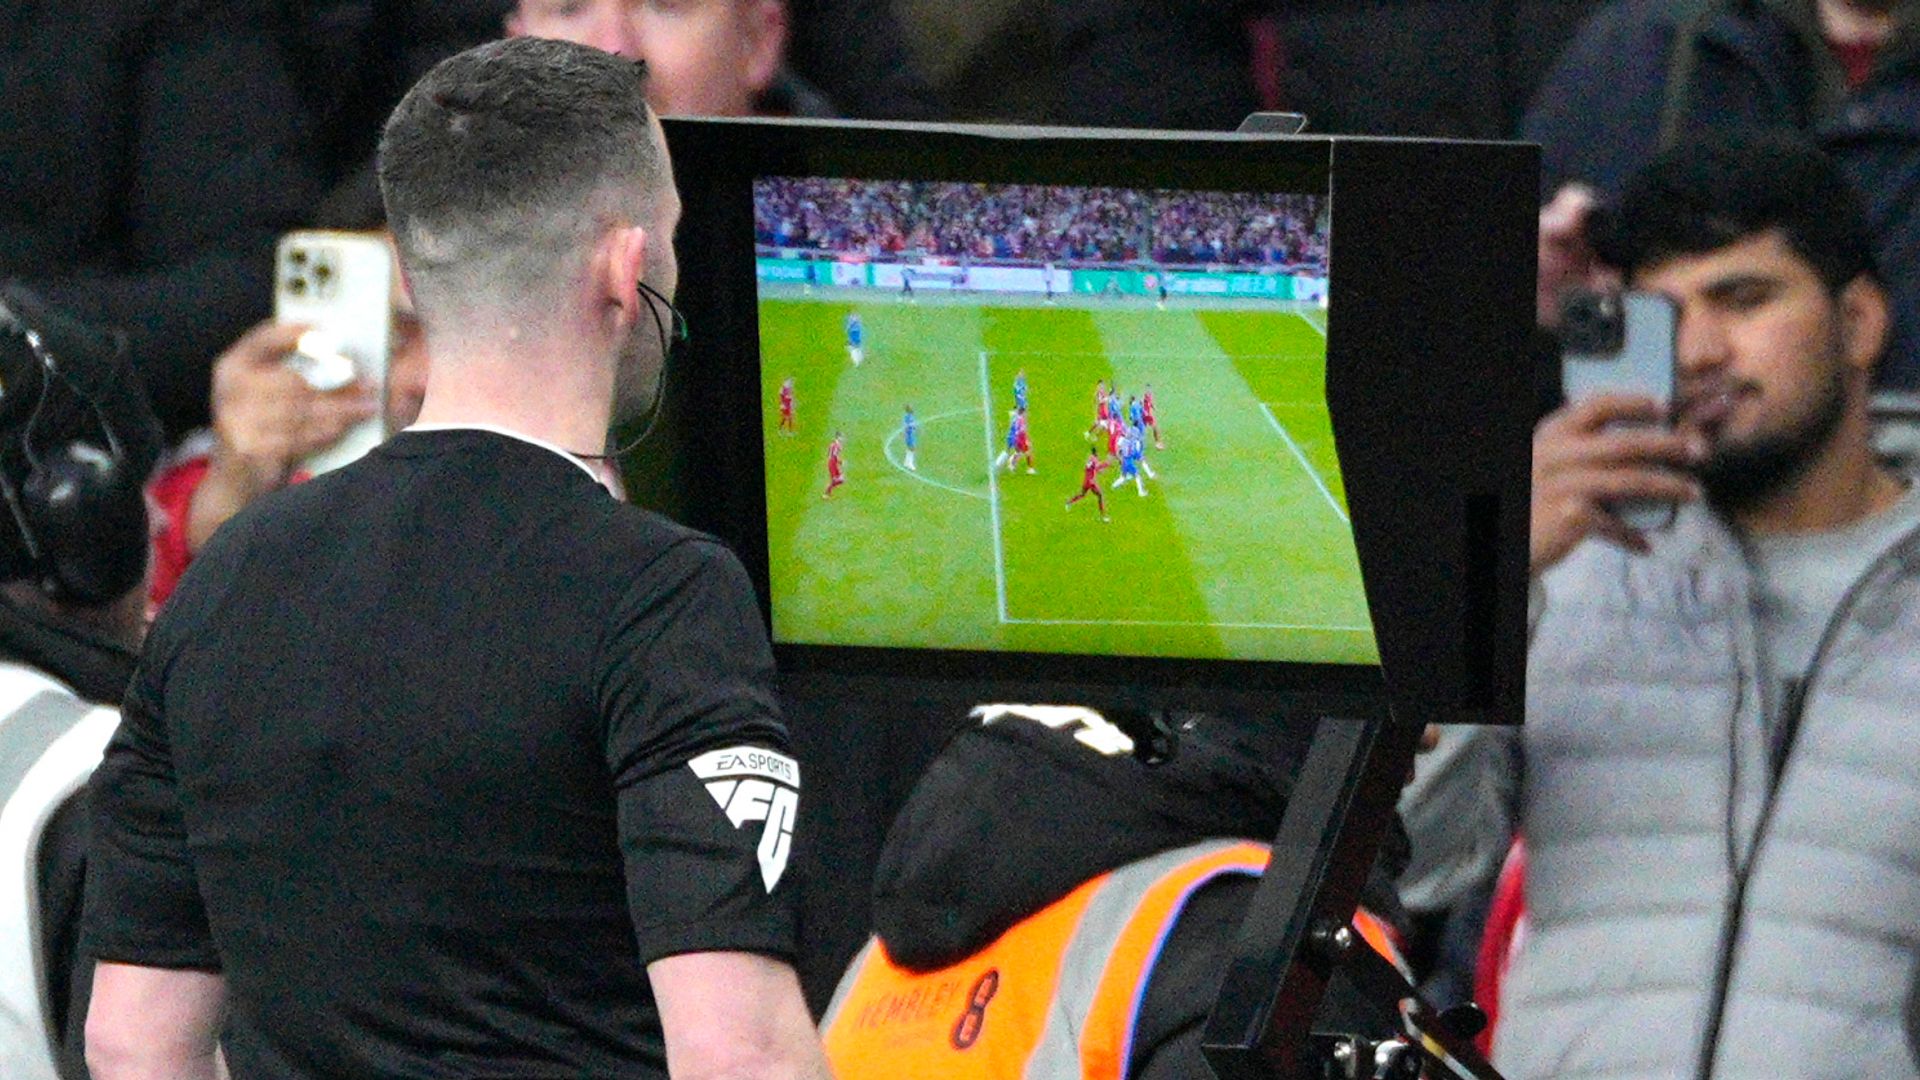 VAR vote looms for Premier League clubs - should it stay or go?